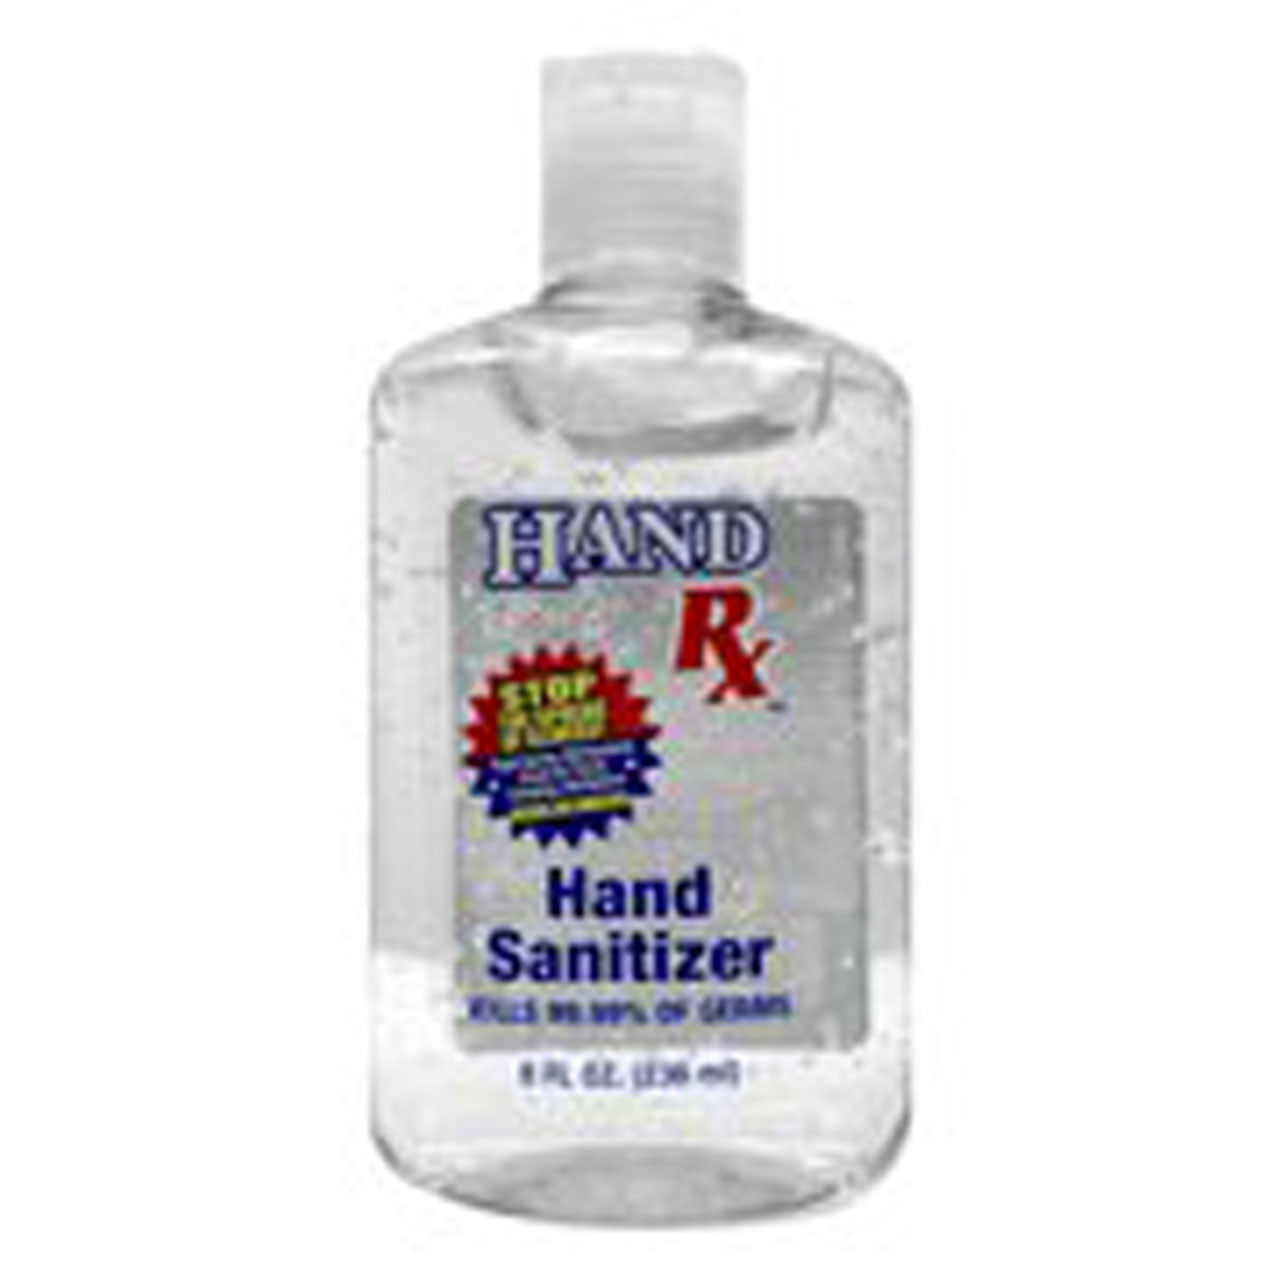 When is it advised for healthcare workers to use Hand Rx Hand Sanitizer?